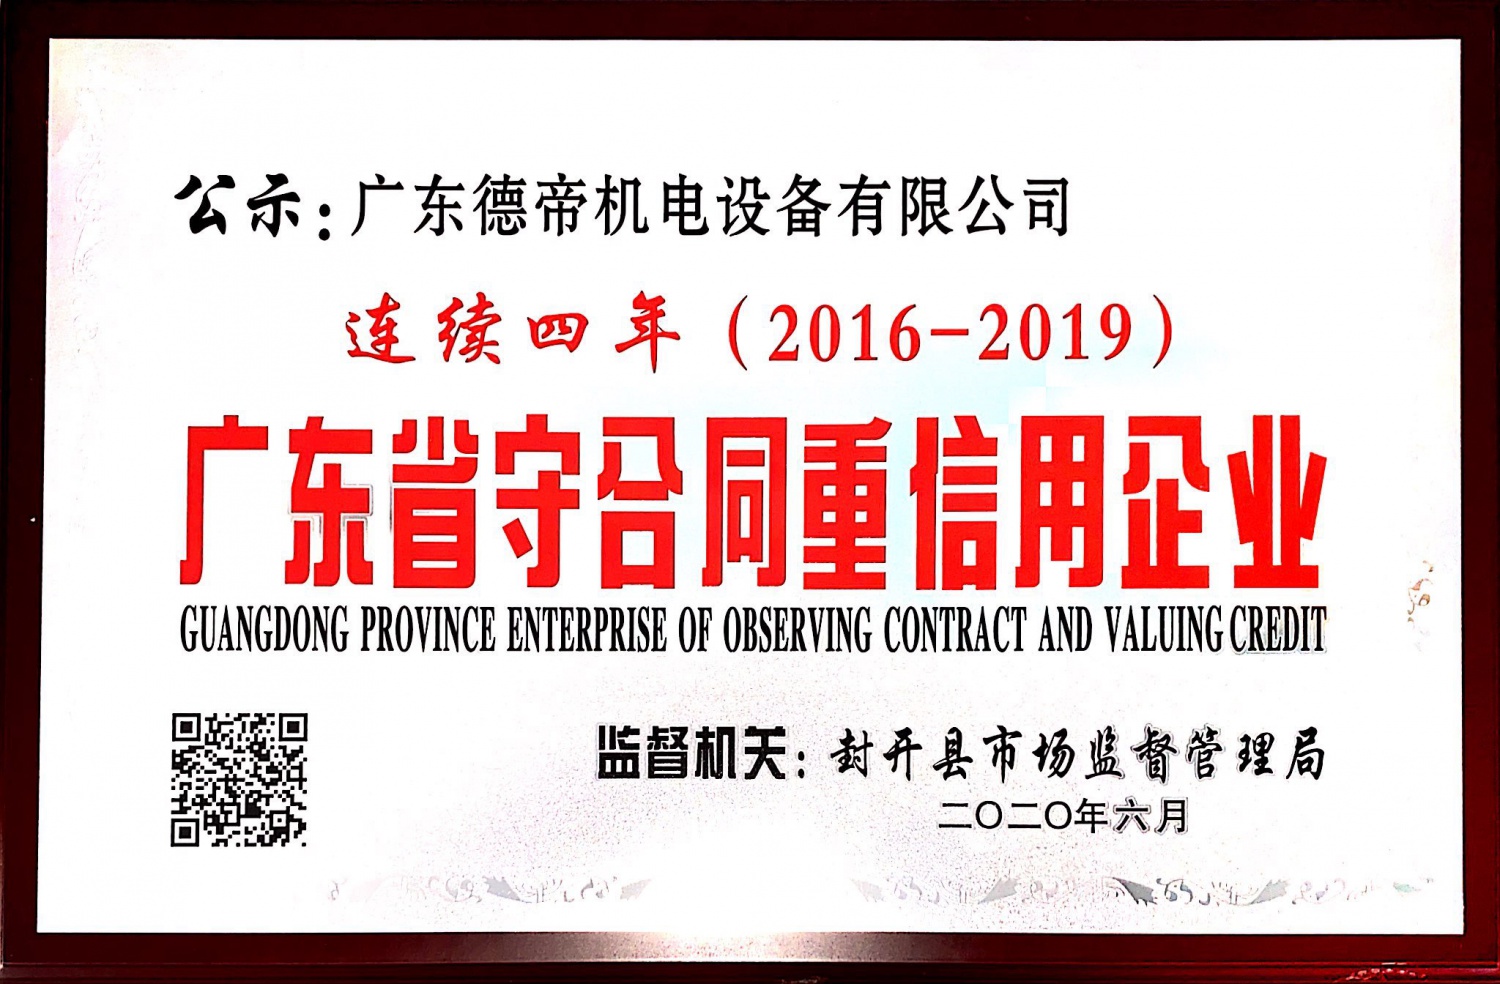 2016-2019 Guangdong Province Contract abiding and Trustworthy Enterprise